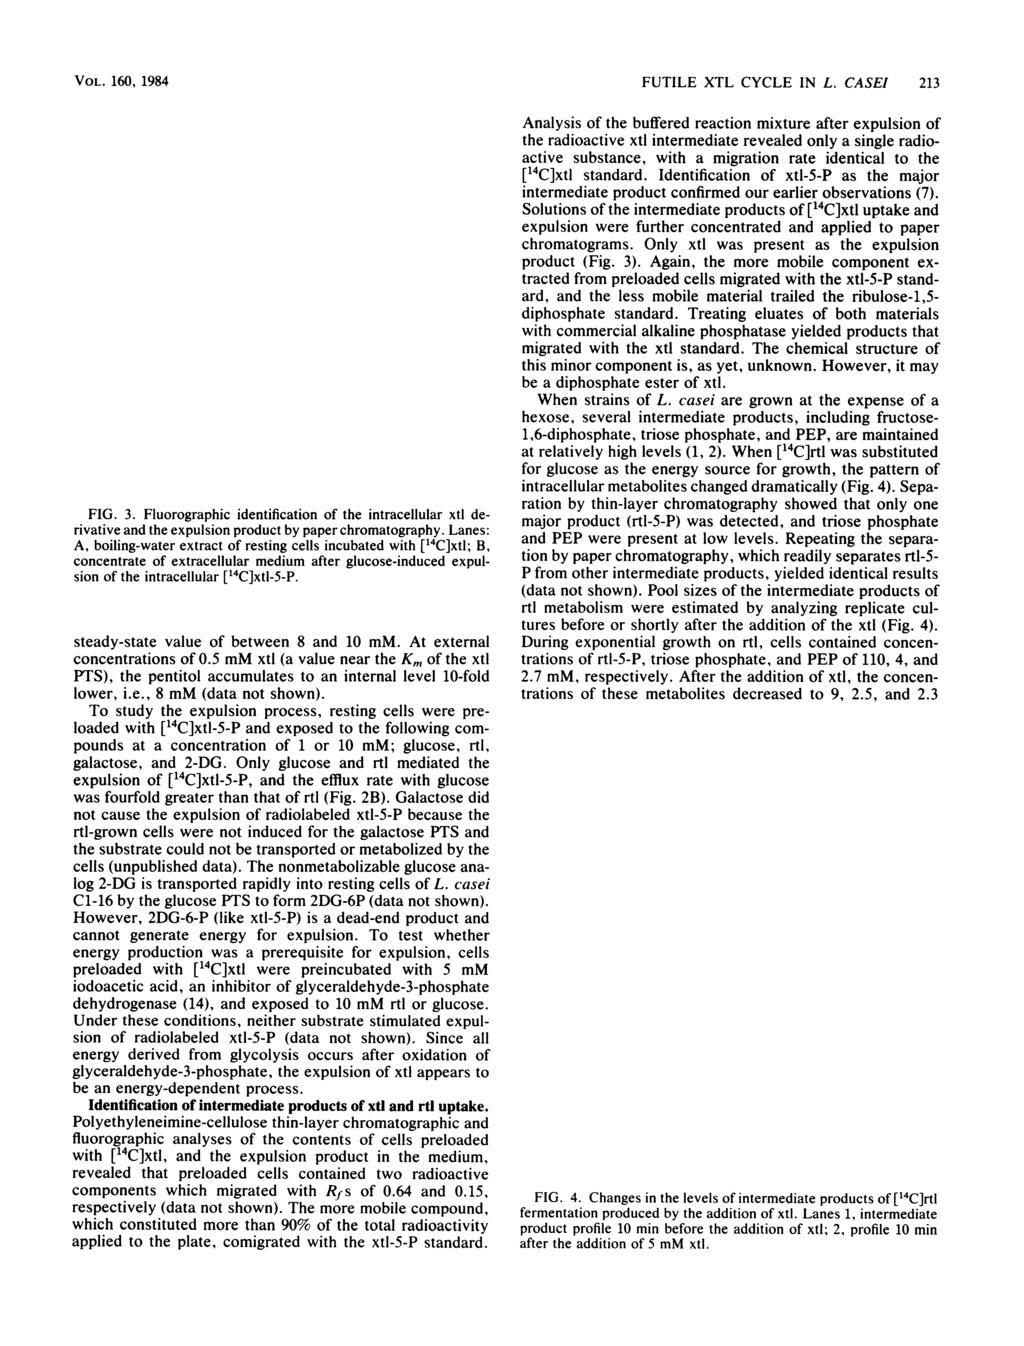 VOL. 160, 1984 A S B 4 xtl * xtl-5-p *xtl-p(p).-origin FIG. 3. Fluorographic identification of the intracellular xtl derivative and the expulsion product by paper chromatography.